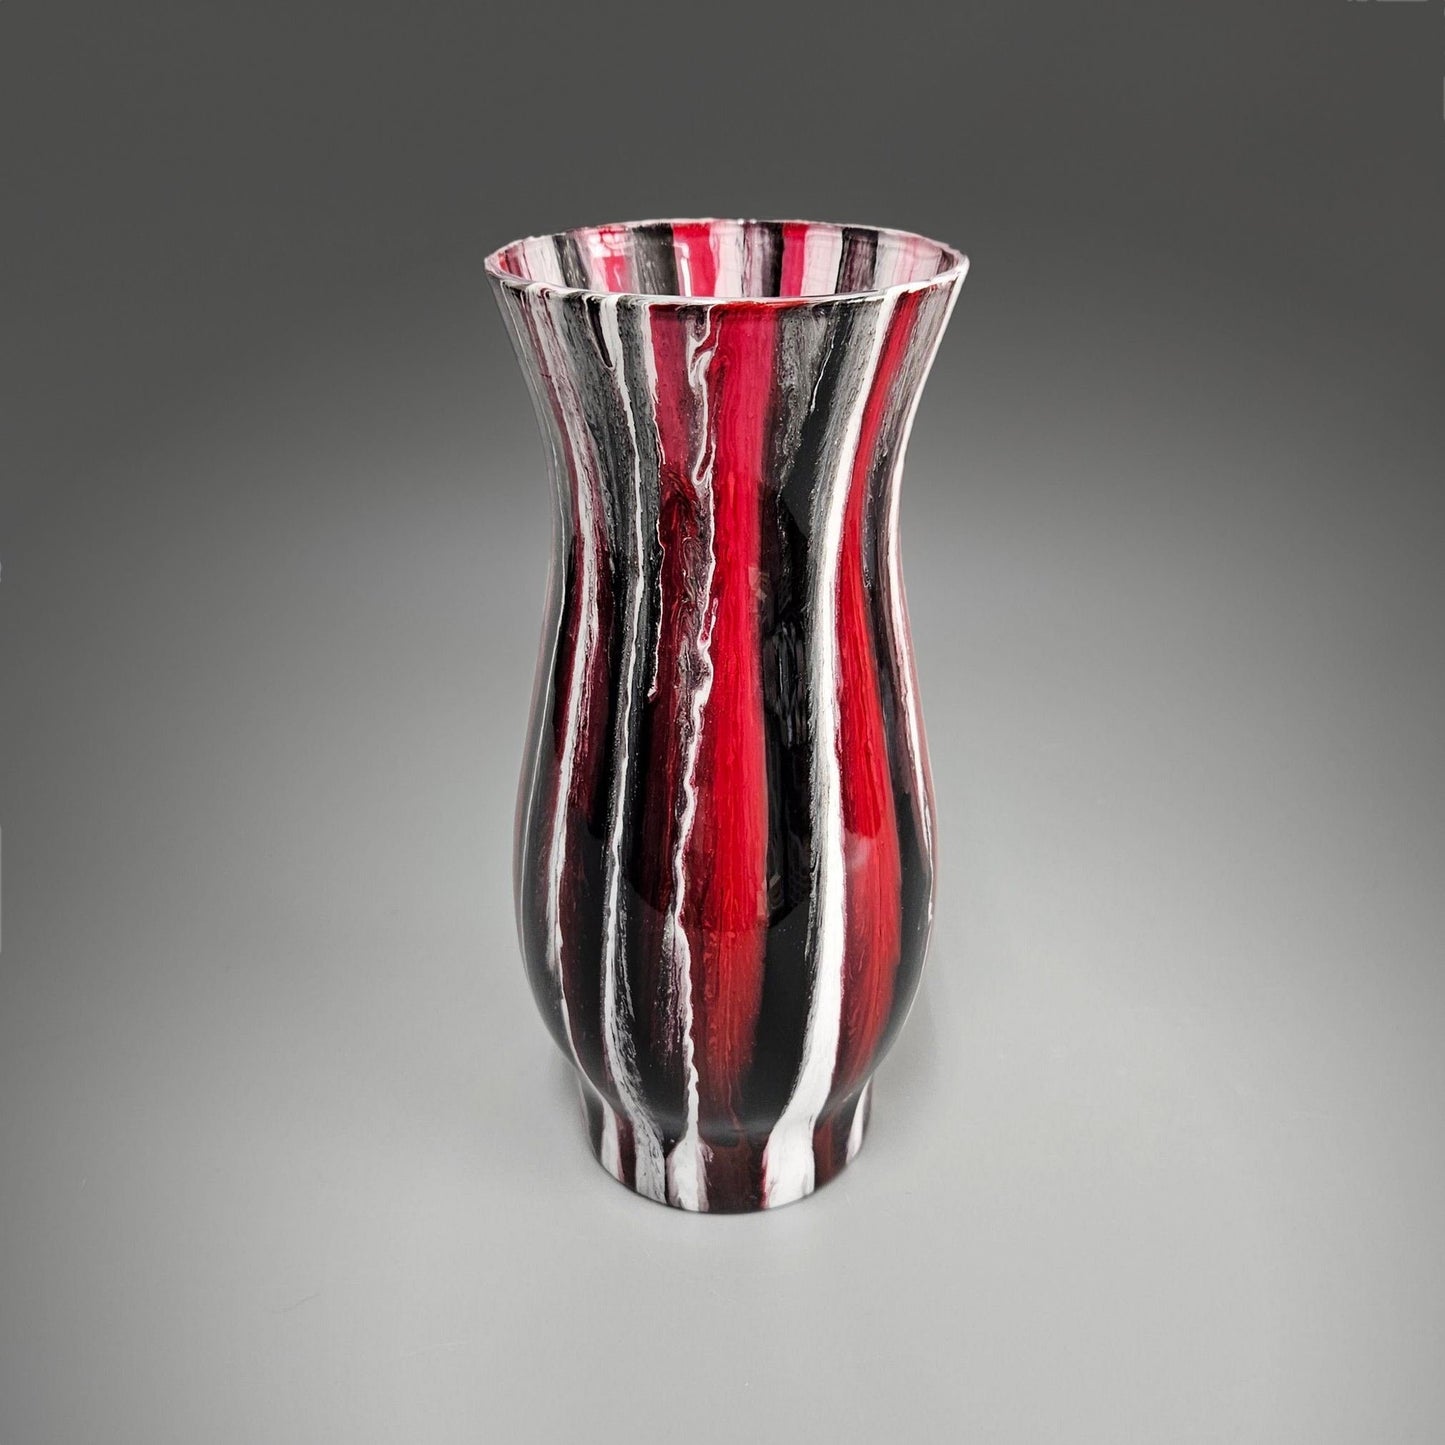 Glass Art Painted Vase in Red Black and White